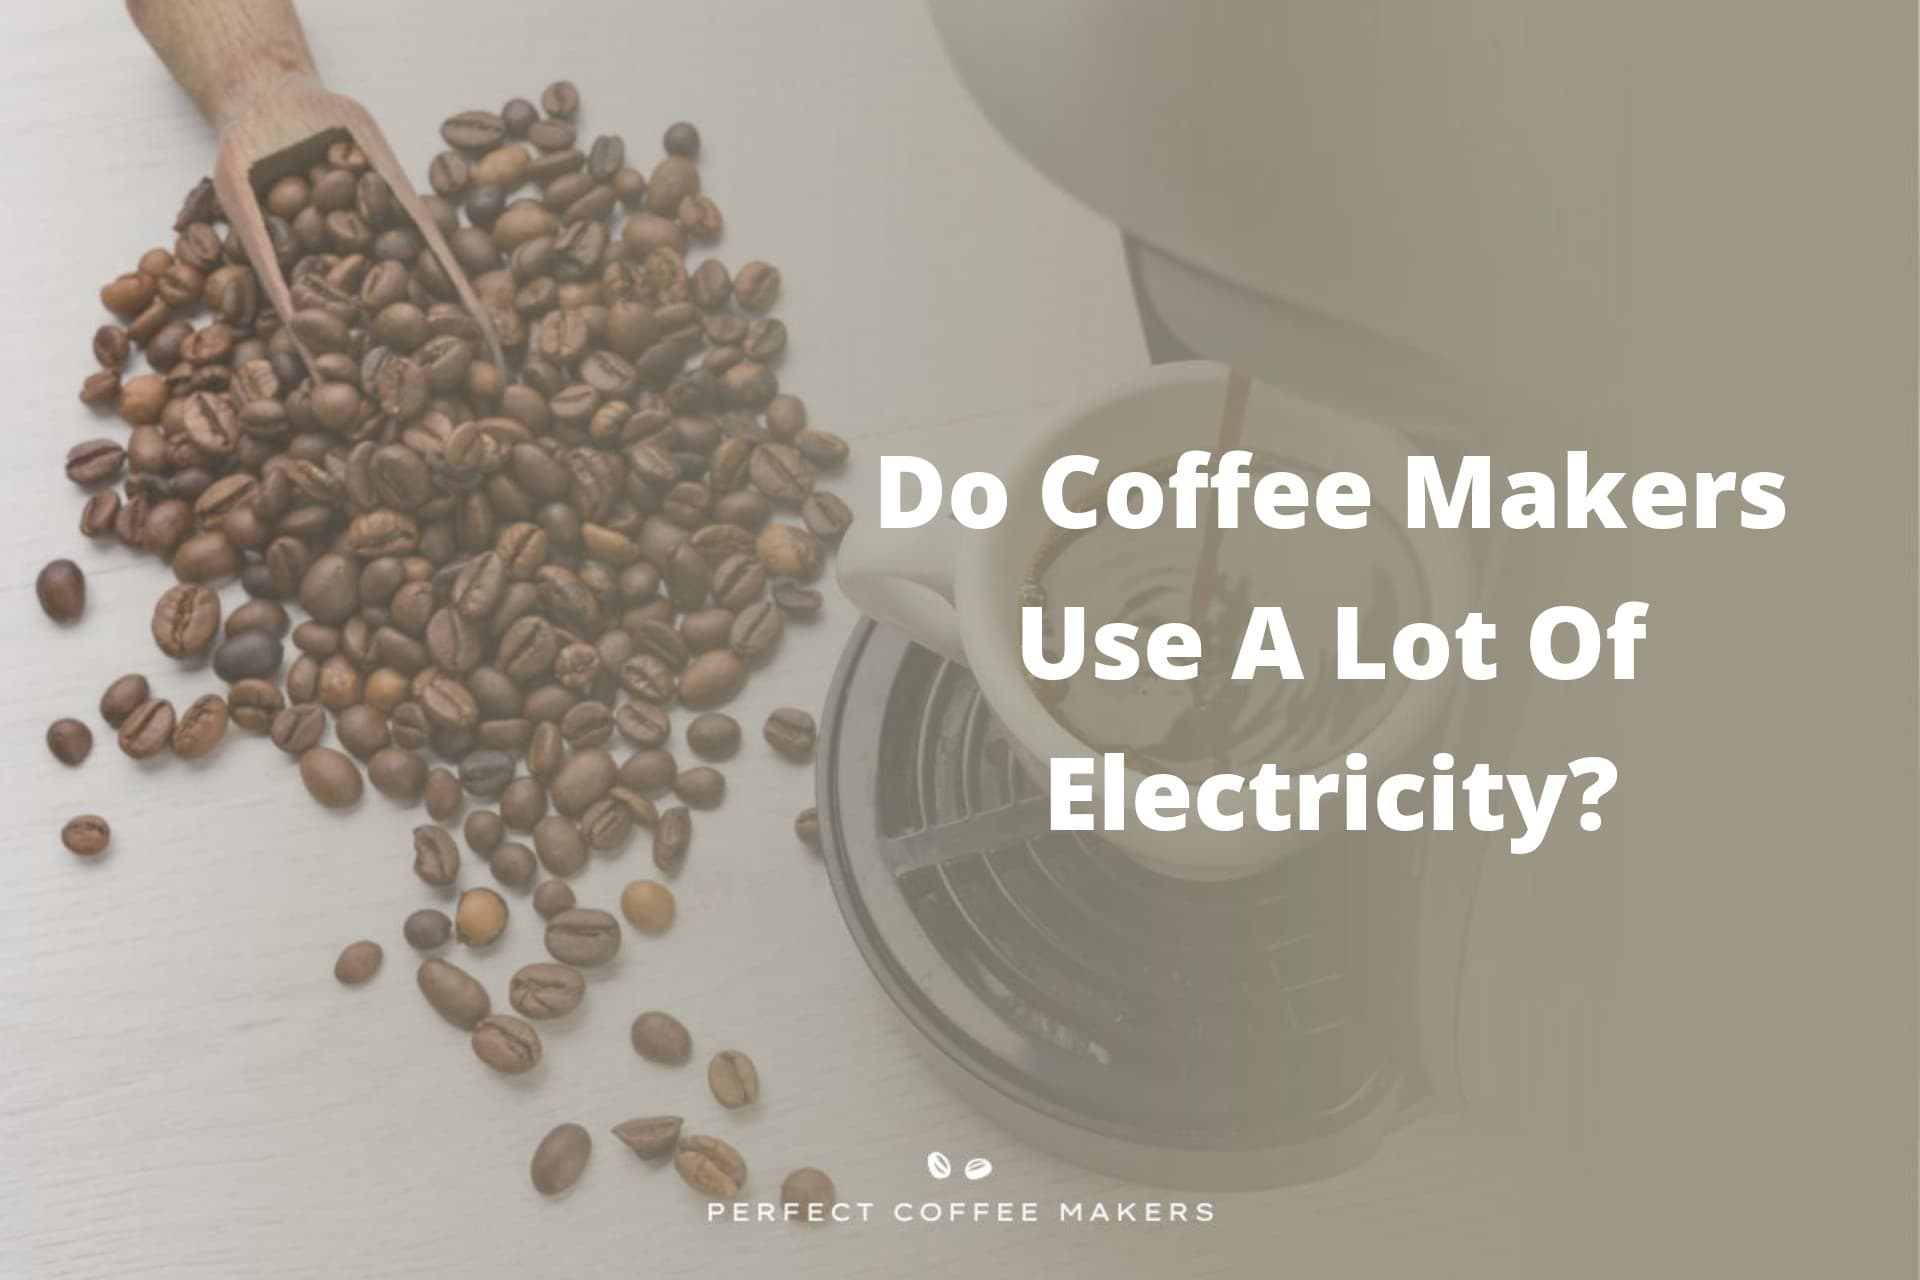 Do Coffee Makers Use A Lot Of Electricity?